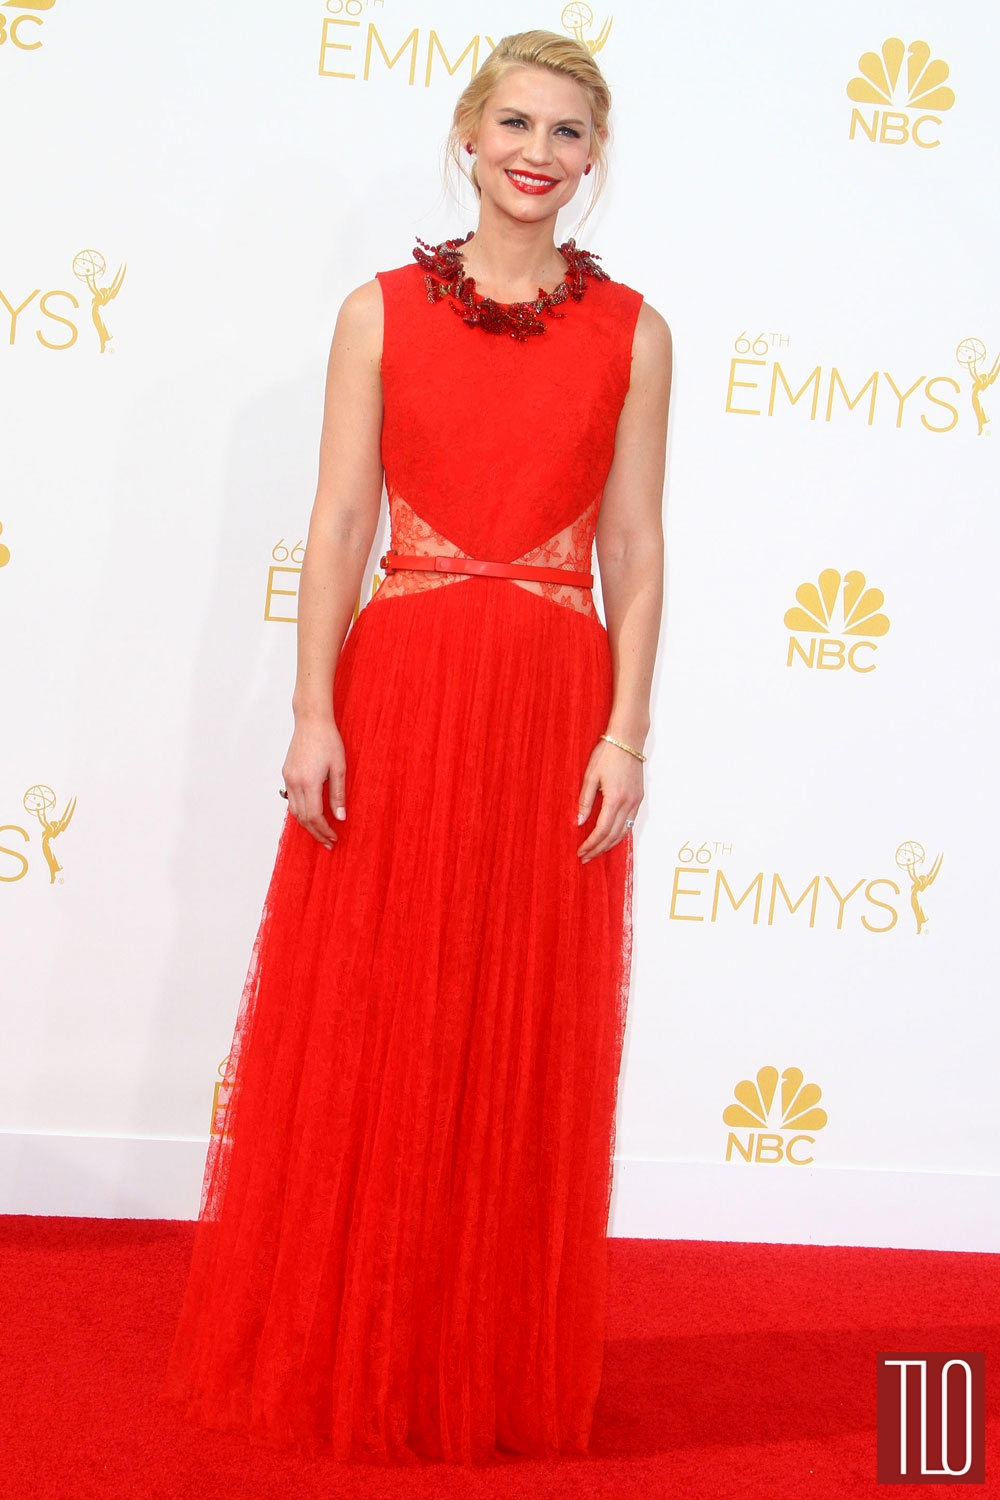 Claire-Danes-2014-Emmy-Awards-Givenchy-Red-Carpet-Tom-Lorenzo-Site-TLO (1)